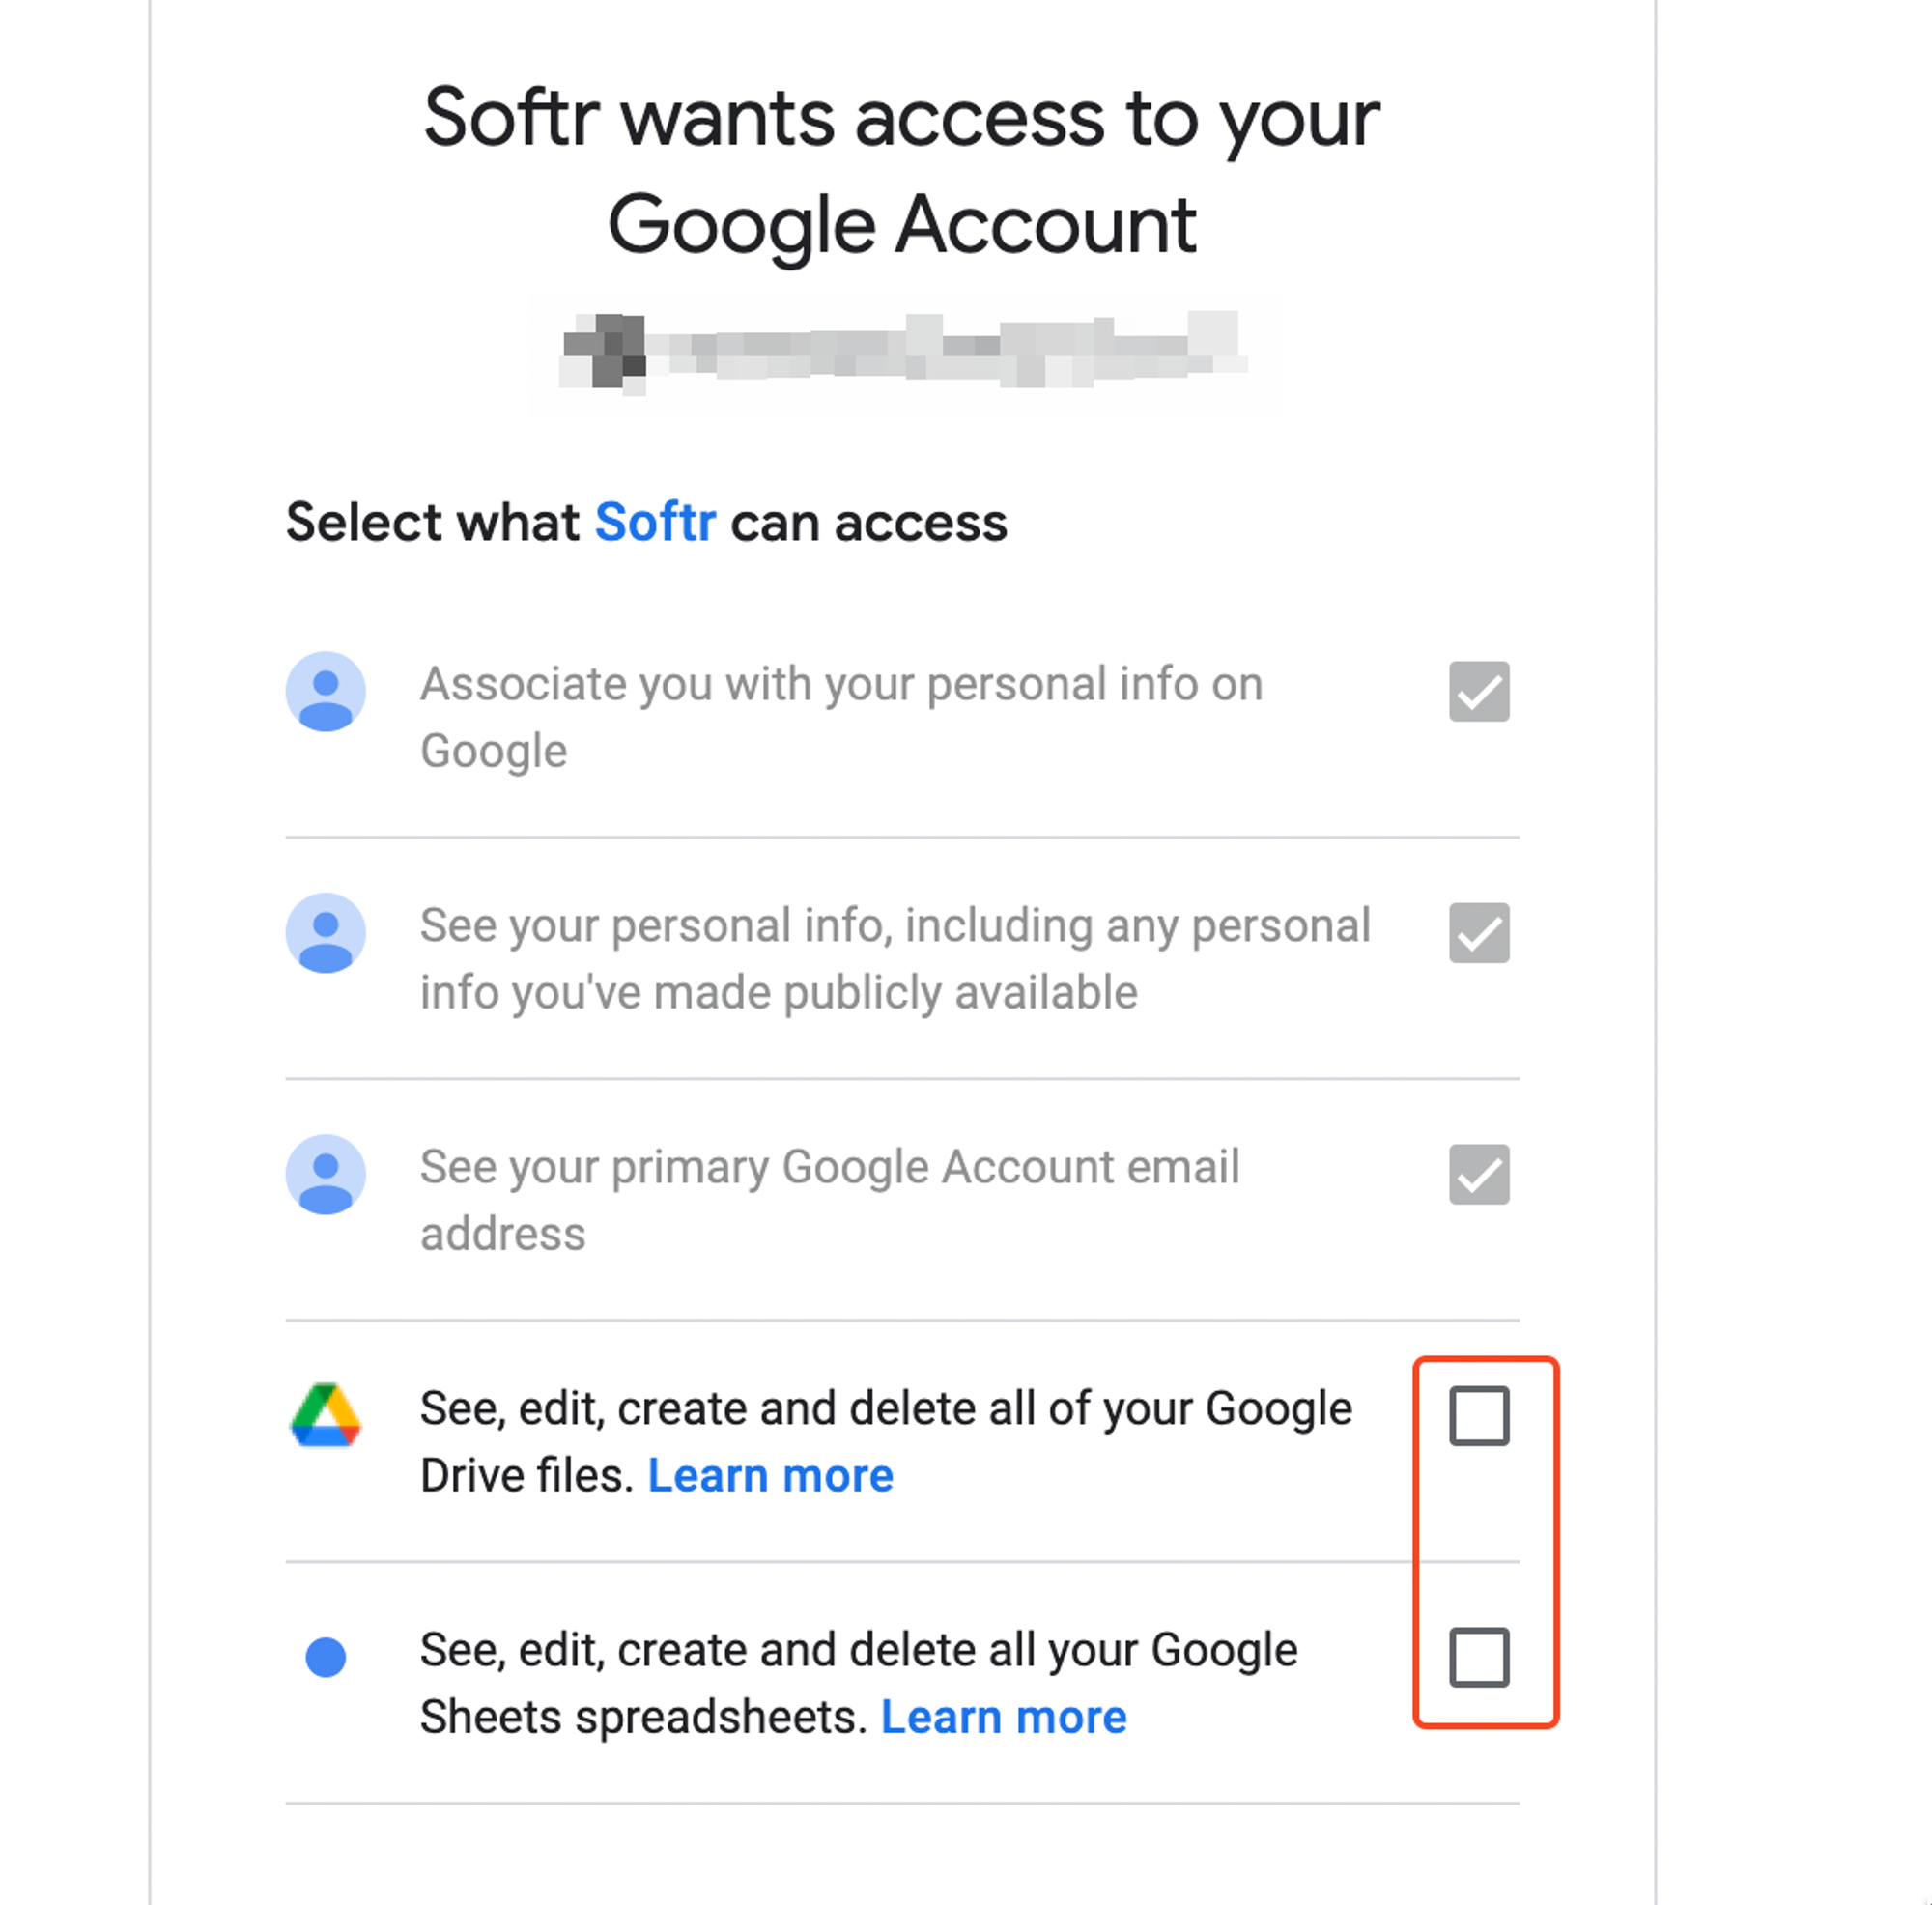 Providing Softr with the required permissions